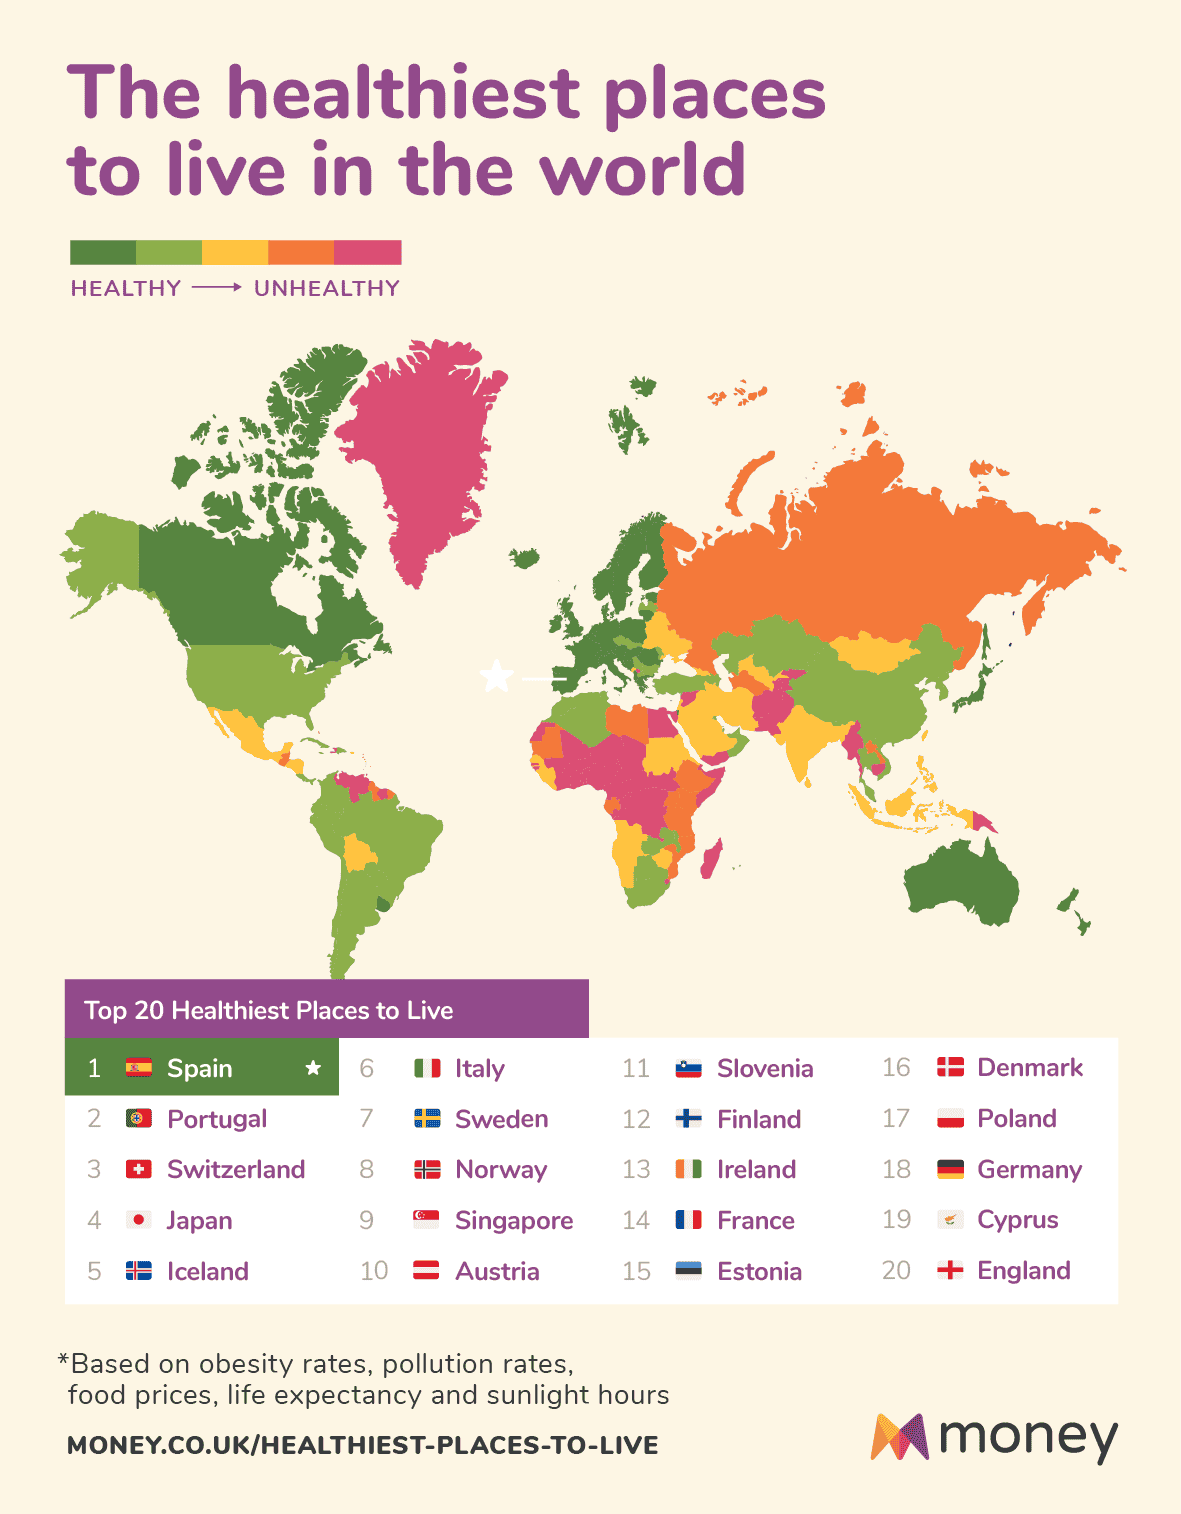 The healthiest places
to live in the world

HEALTHY — UNHEALTHY

  

Top 20 Healthiest Places to Live

  
    

       

JRL ESET) 10 Italy 11 «=m Slovenia 16 = Denmark
B38 Portugal / ~~ &amp;= Sweden 12 4 Finland / =m Poland
£3 Switzerland 8 #8 Norway 13 00 Ireland 18 ®8® Germany
® Japan 9 “=m Singapore 14 00 France 19 « Cyprus

5 da Iceland 10 = Austria 15 &amp;&amp; Estonia 20 += England

*Based on obesity rates, pollution rates,
food prices, life expectancy and sunlight hours

MONEY.CO.UK/HEALTHIEST-PLACES-TO-LIVE JAMon ey